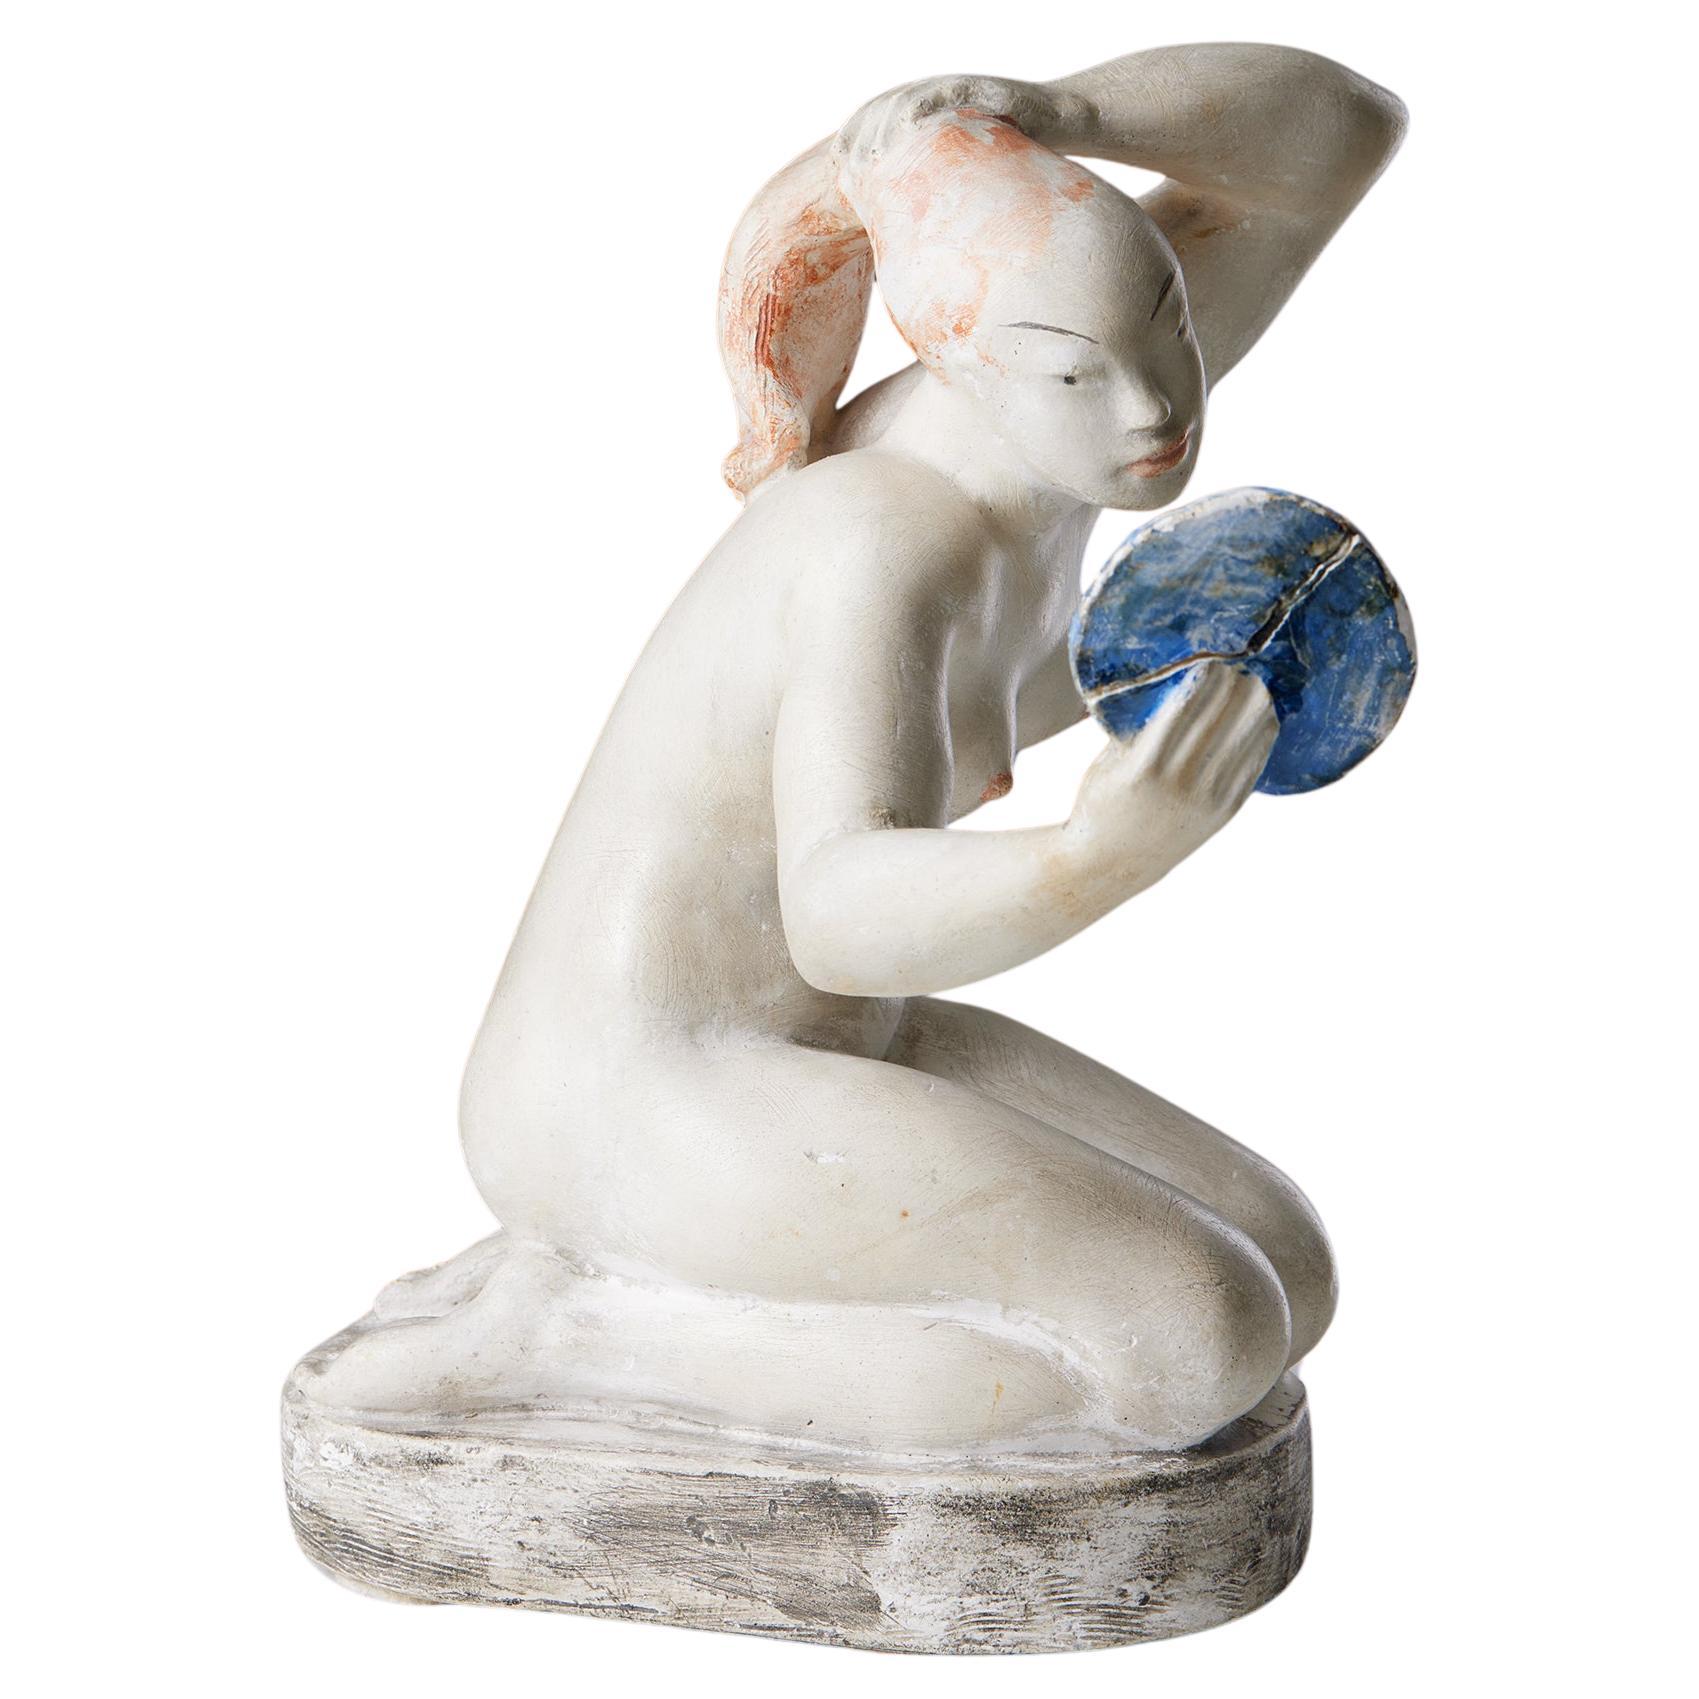 Sculpture by Nils Fougstedt, Sweden, 1941, Woman holding a mirror, Plaster